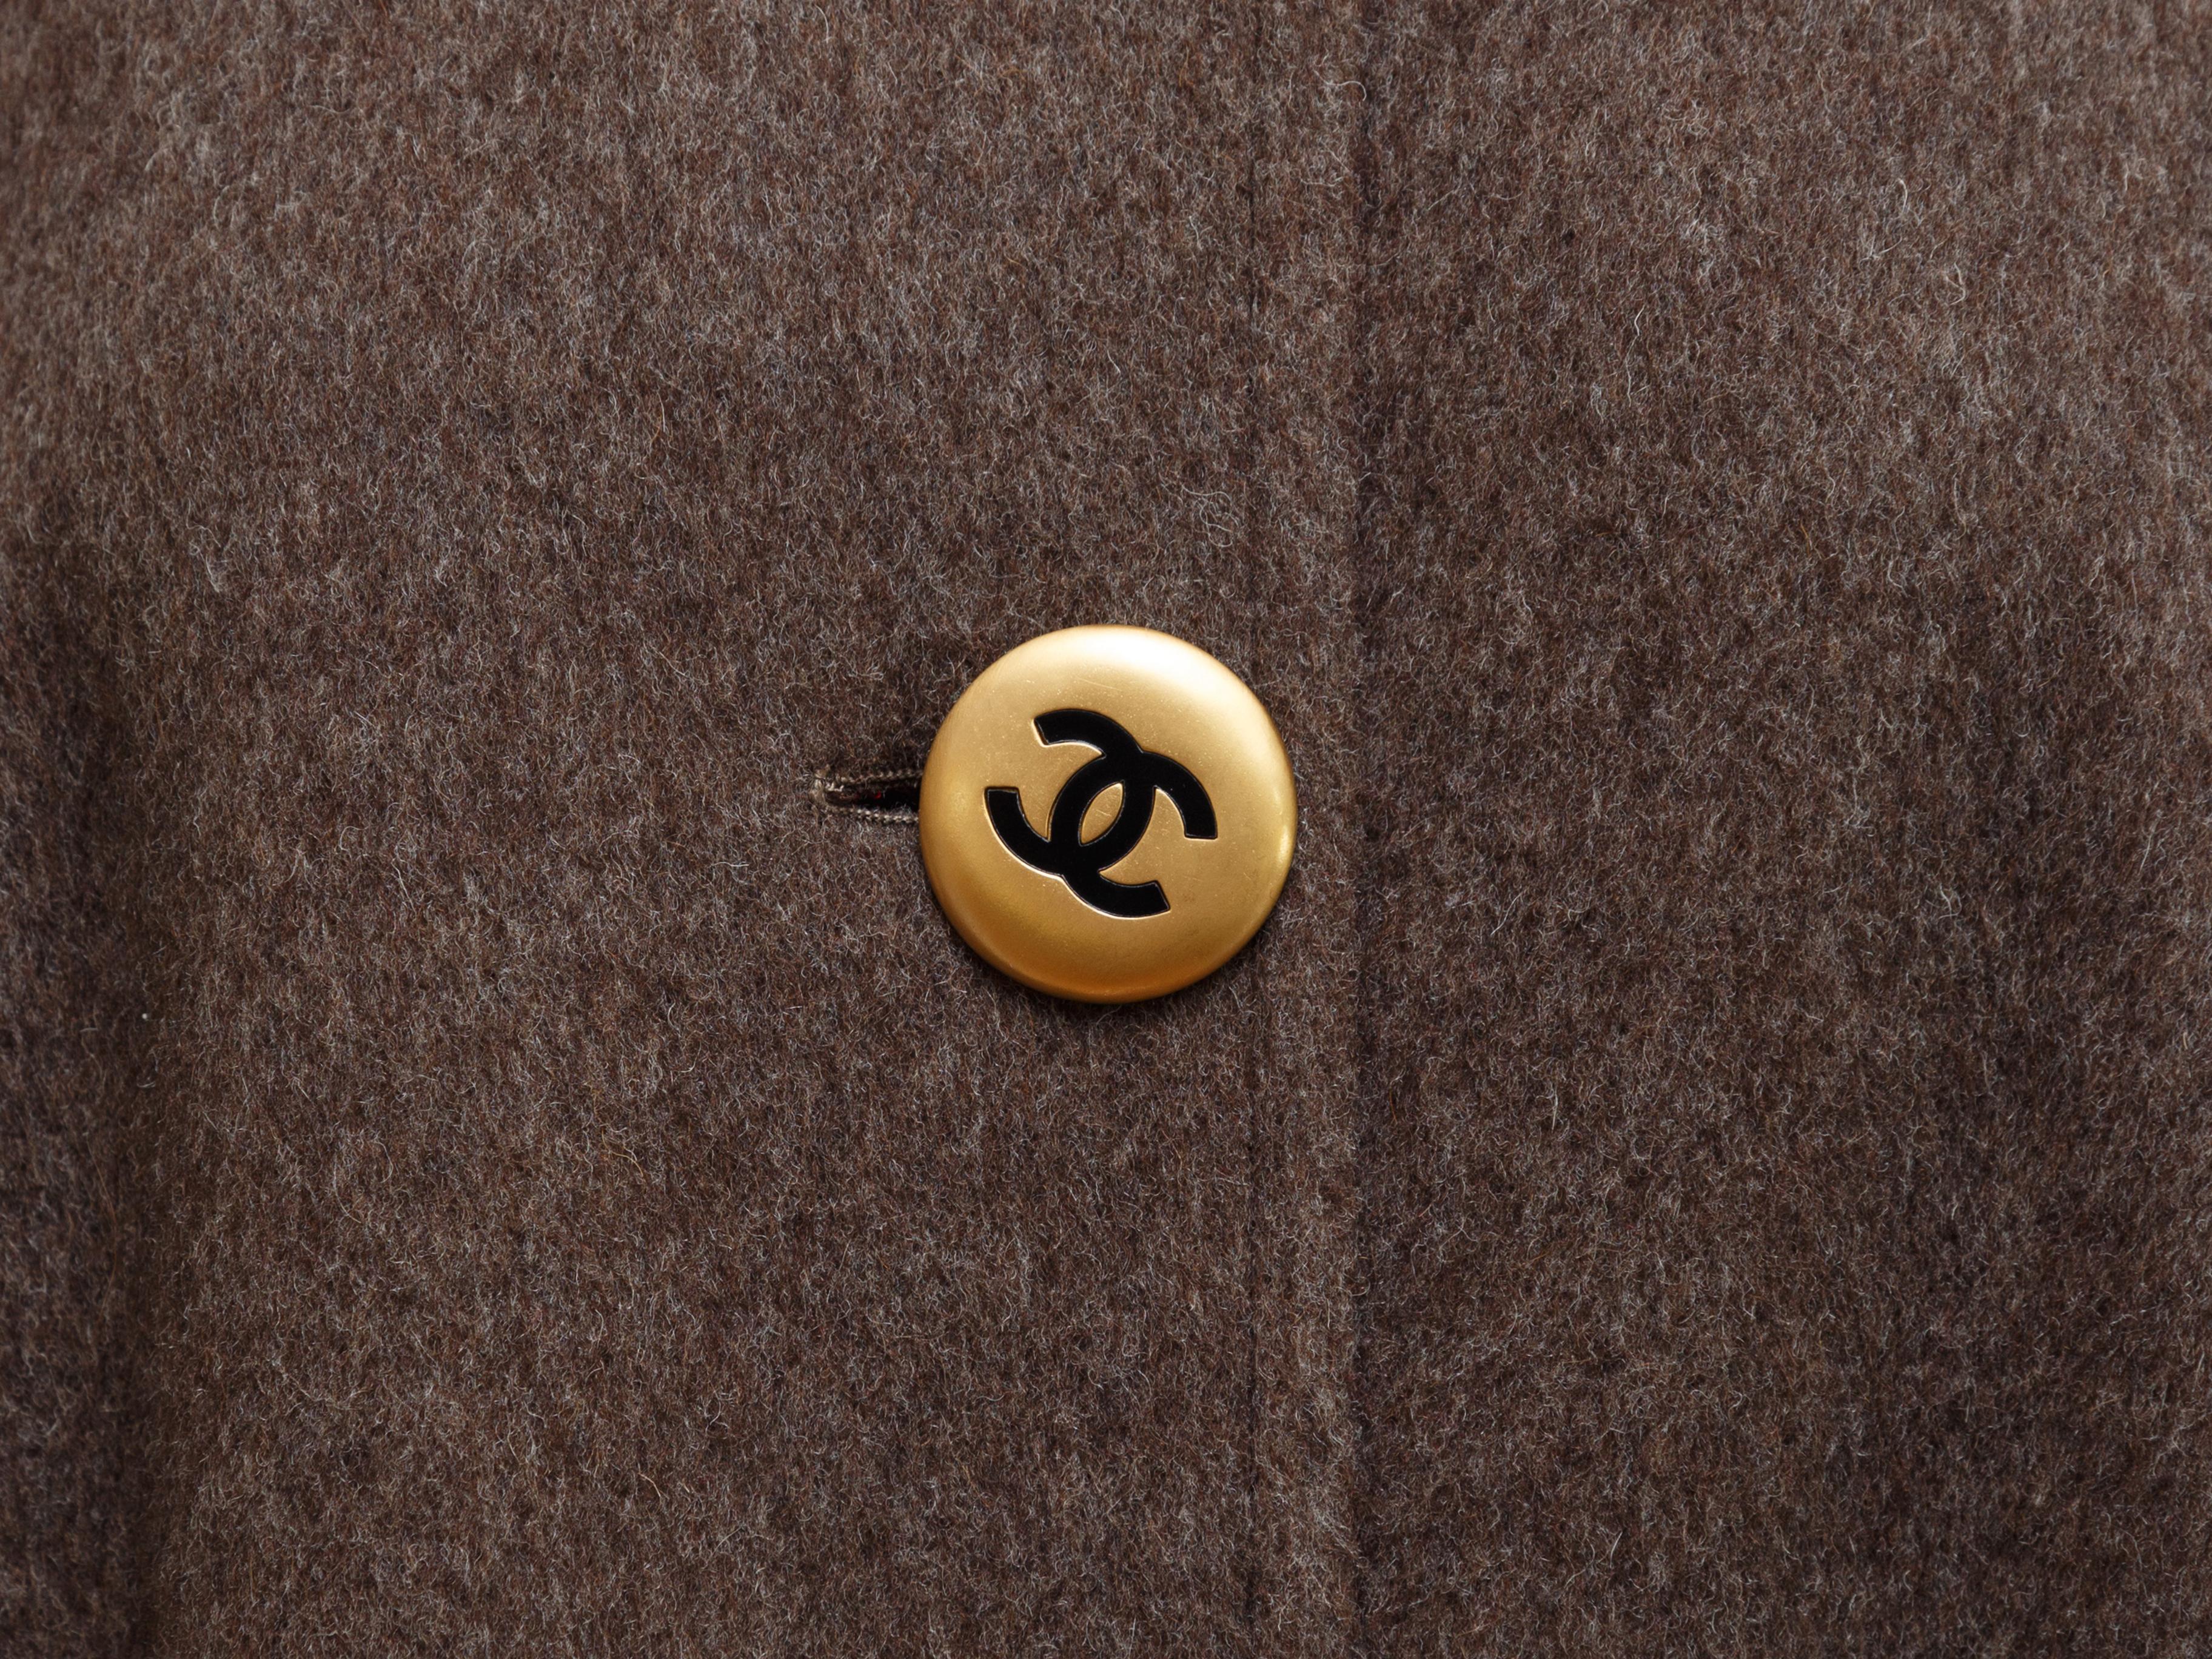 Product details: Brown Chanel Wool Coat. This raglan sleeve Chanel coat is lined in bright red wool, has gold tone buttons engraved with the designer's interlocking C's, and the coat is cut in an A-line. 29